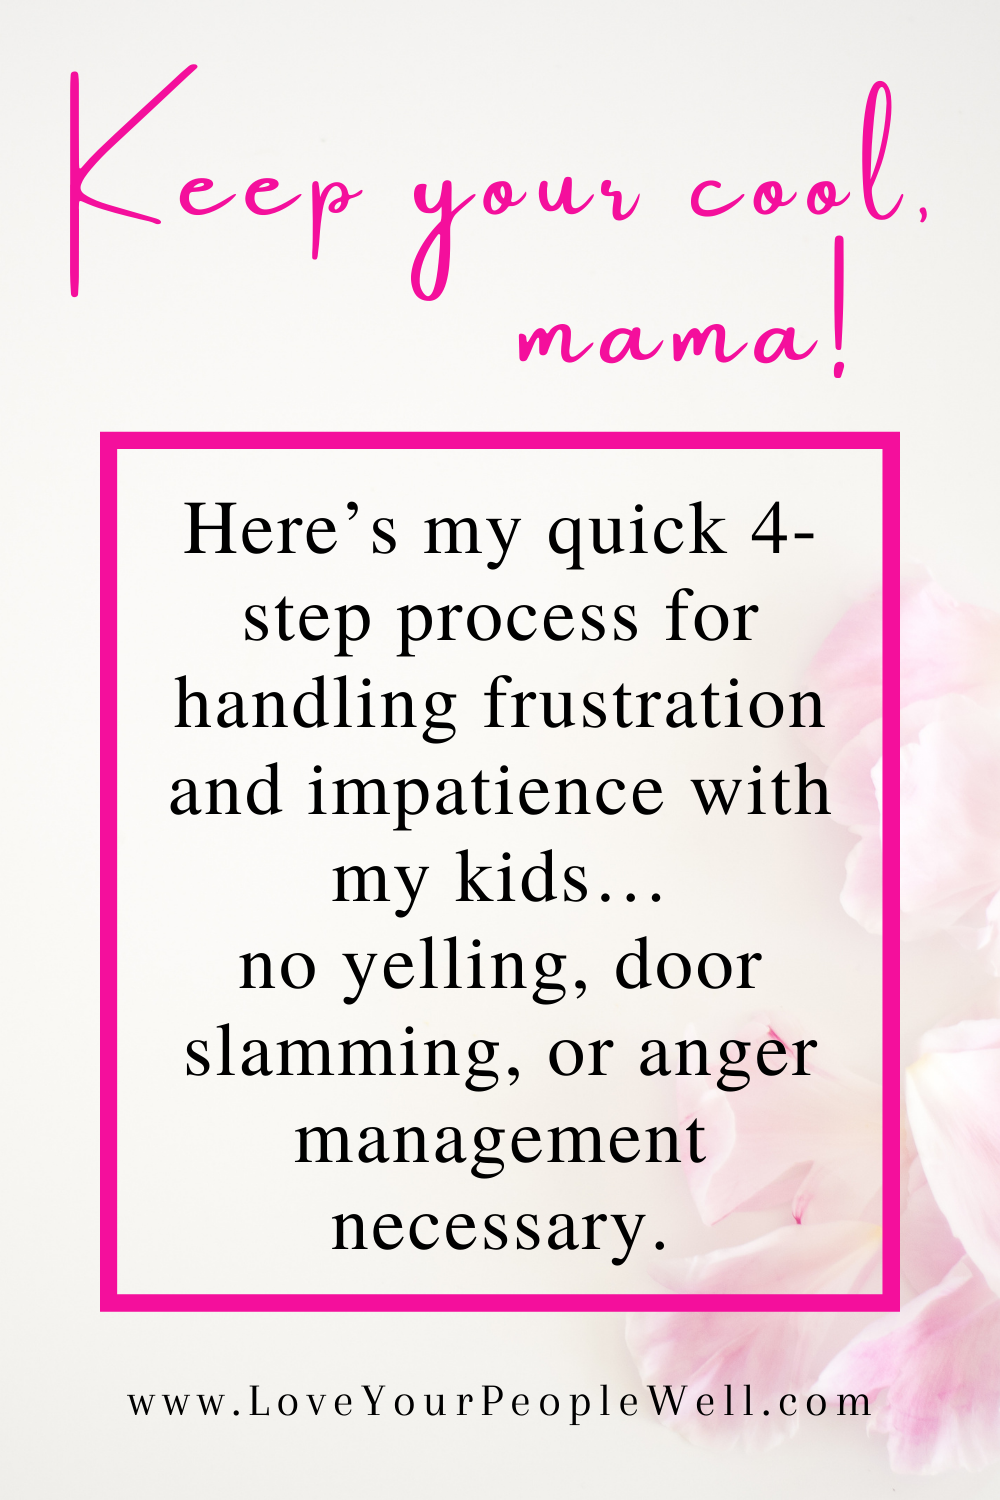 Keep your cool, mama! Here’s my quick 4-step process for handling frustration and impatience with my kids… no yelling, door slamming, or anger management necessary // Episode 31